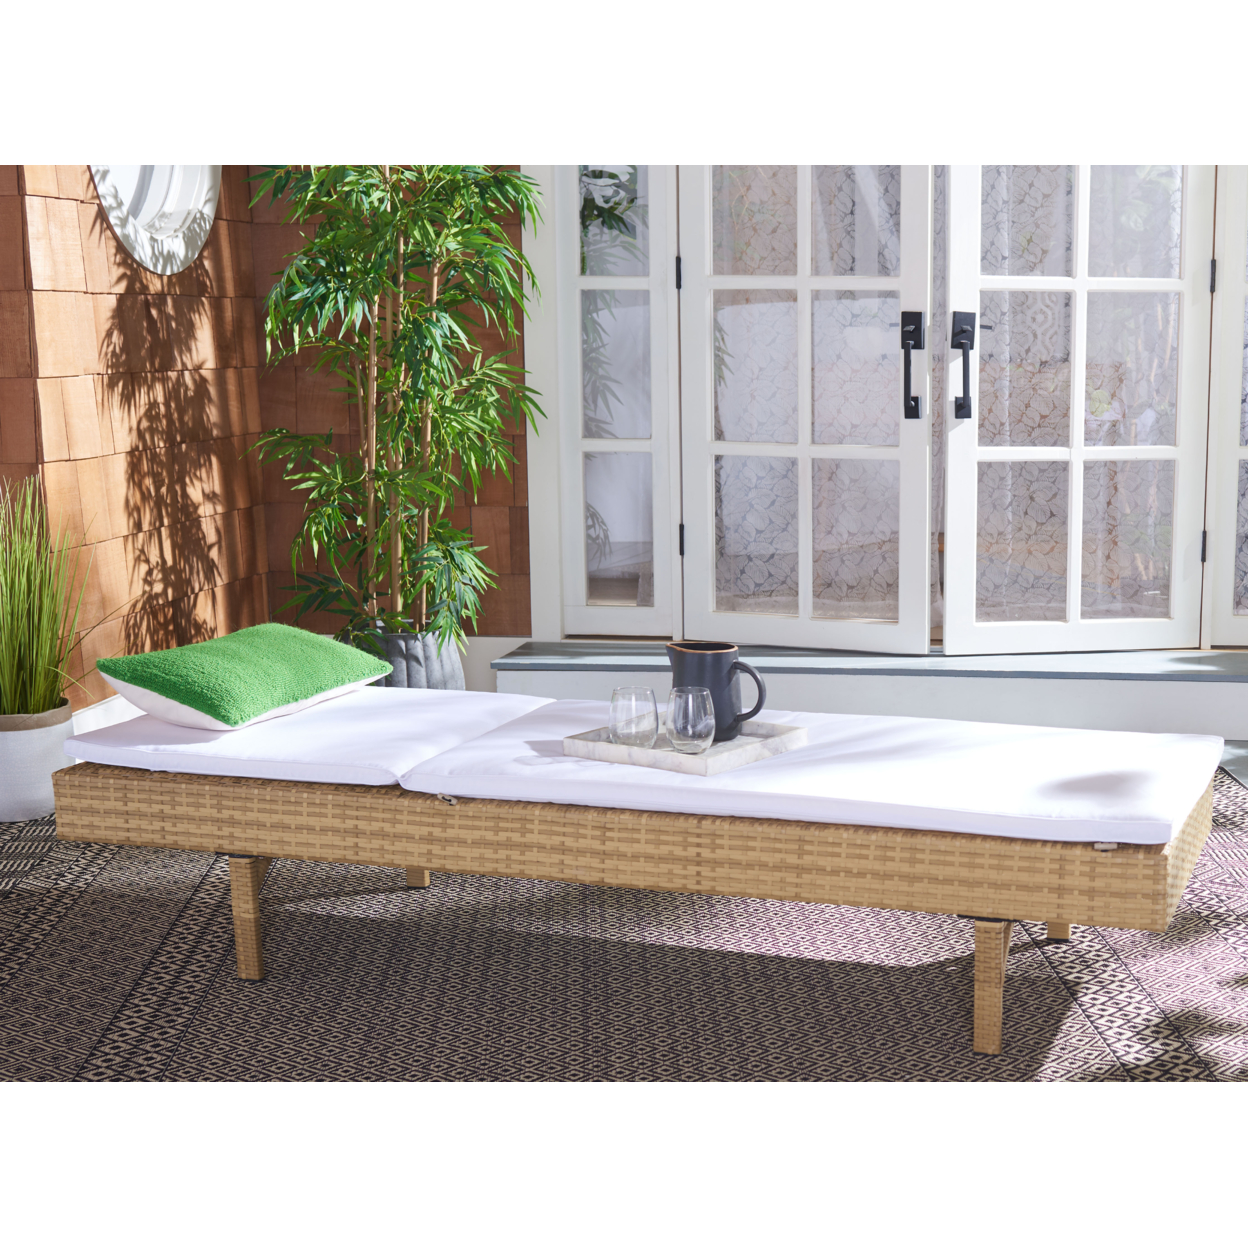 SAFAVIEH Outdoor Collection Cam Chaise Sunlounger Natural/White